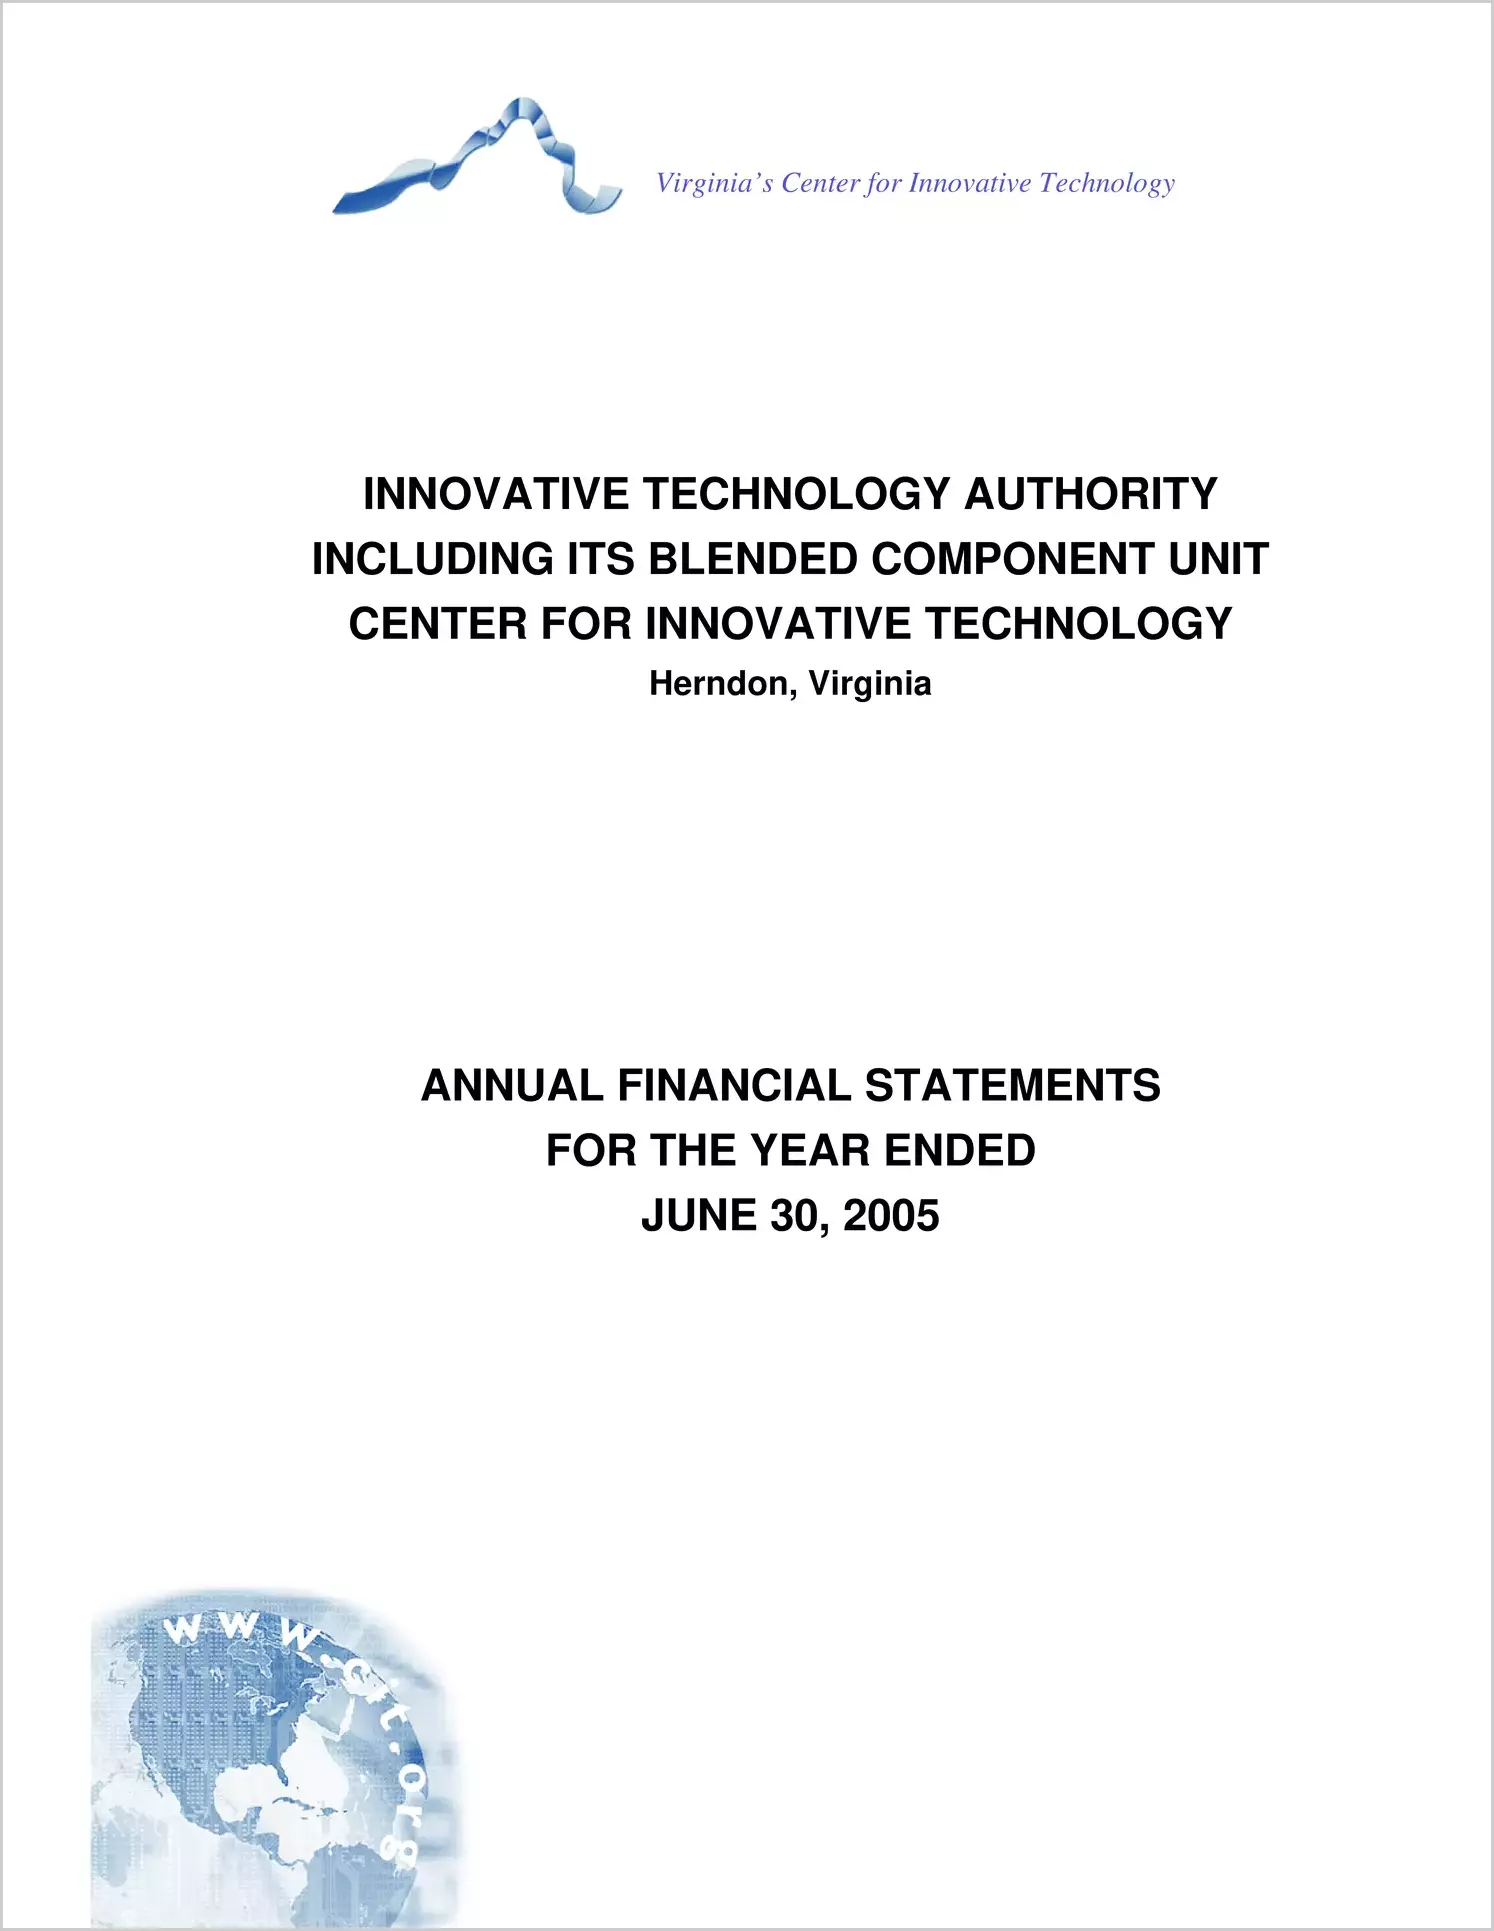 Innovative Technology Authority and the Center for Innovative Technology for the year ended June 30, 2005